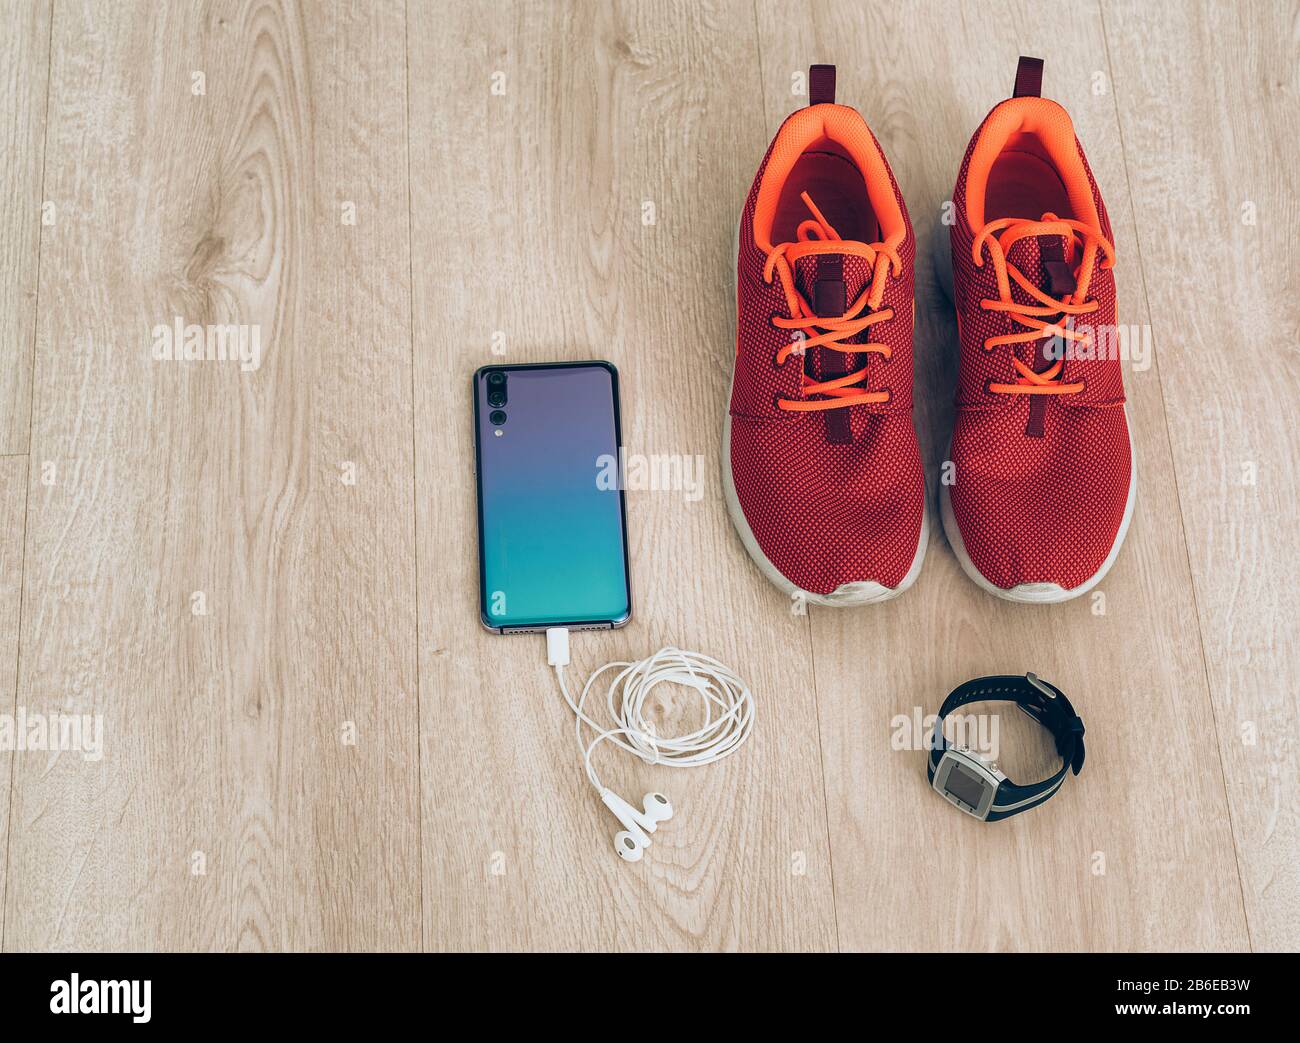 Cool runner sneakers with smartphone, earphones and fitbit sport watch. Ready for training, healthy life Stock Photo